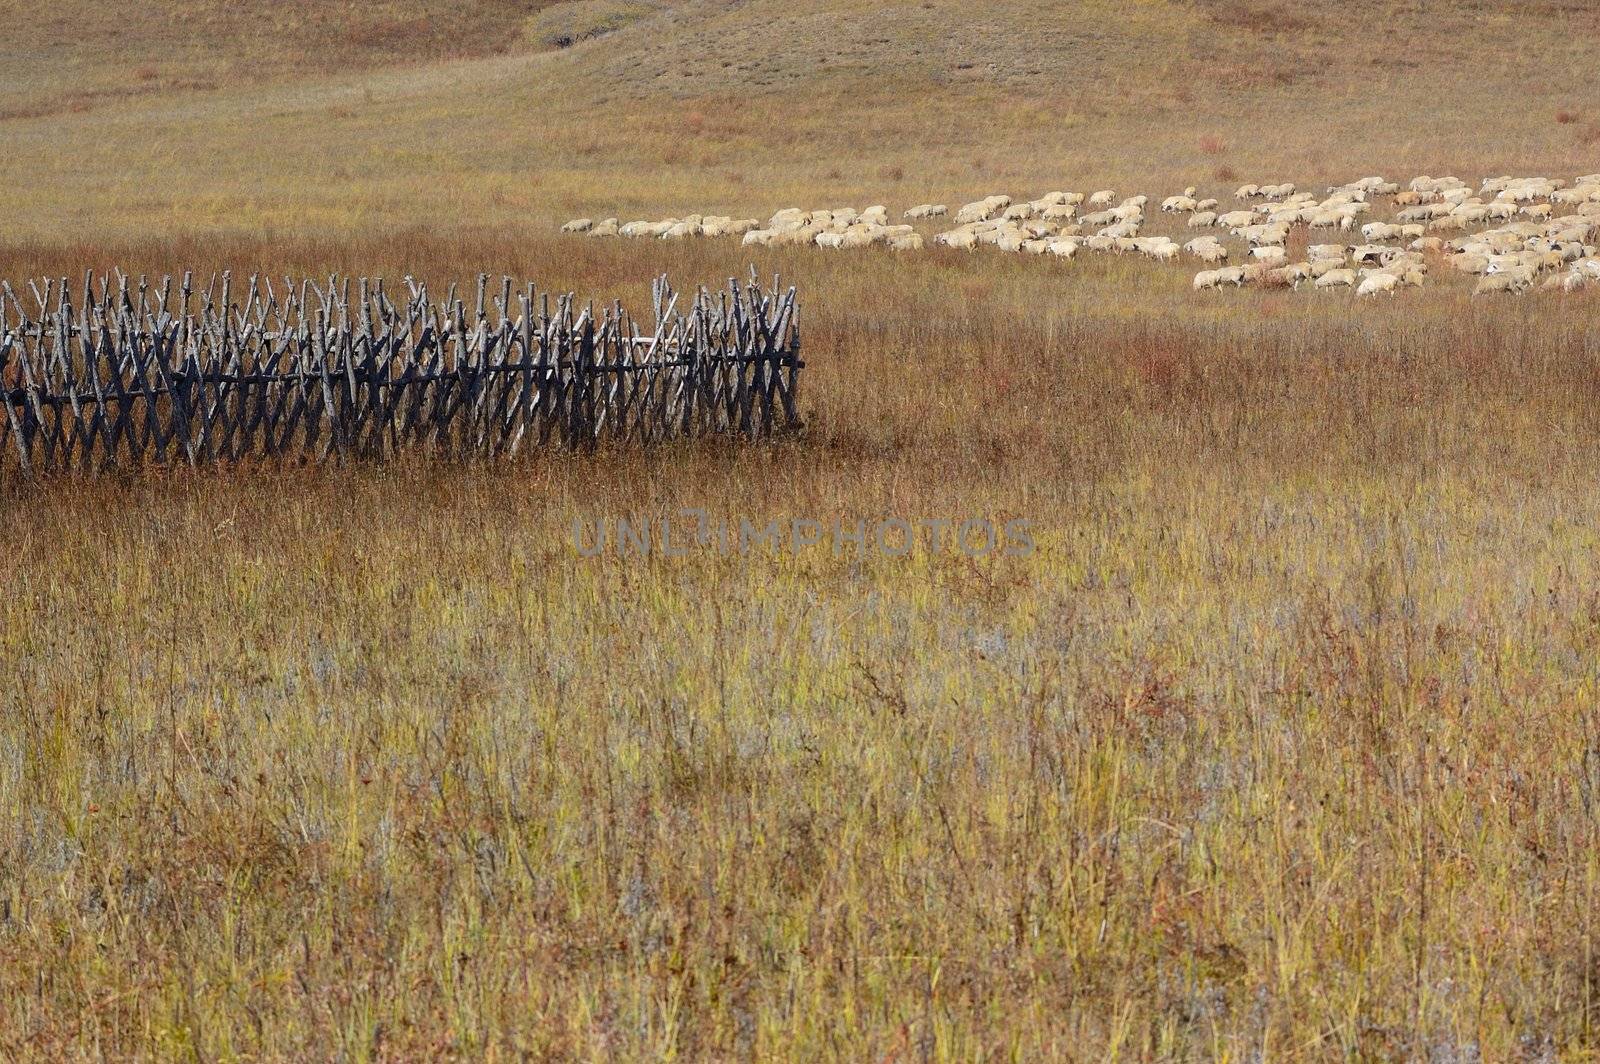 Group of sheep in grassland by raywoo